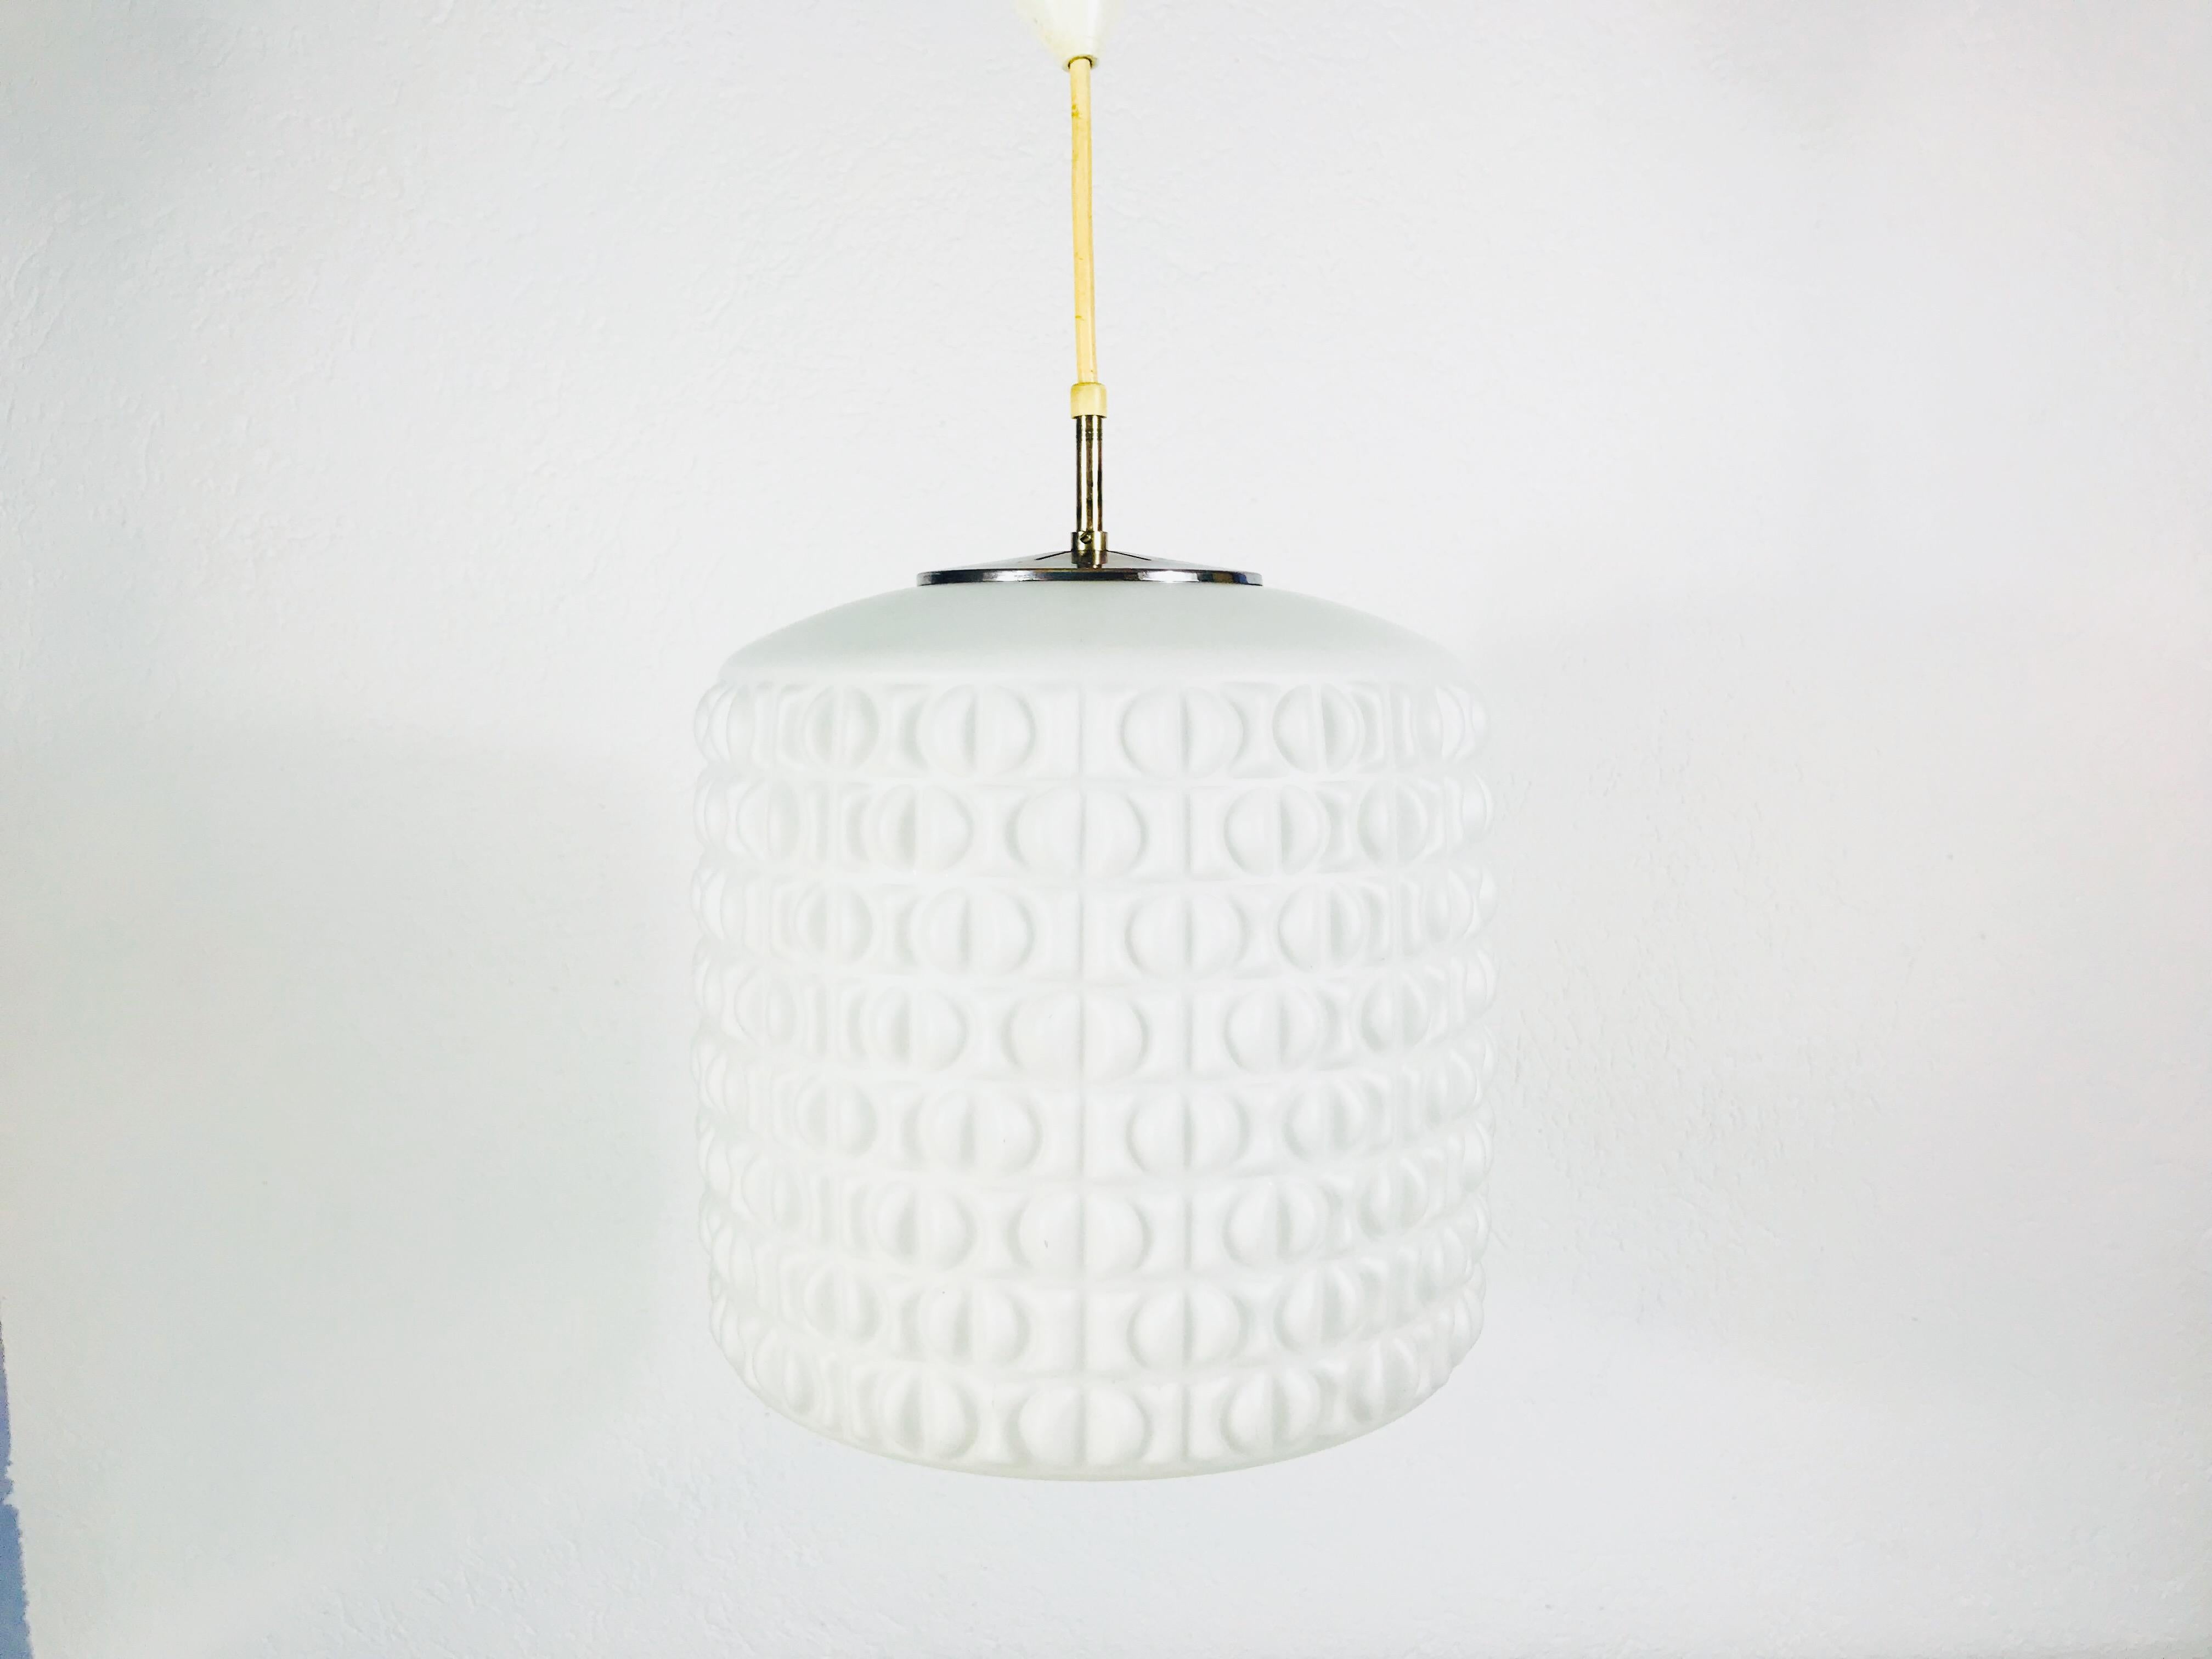 A Peill and Putzler hanging lamp made in Germany in the 1970s. It is fascinating with its glass ornaments. Textured opaline glass with aluminum top. The lamp has a beautiful cylinder shape.

The light requires one E27 light bulb.